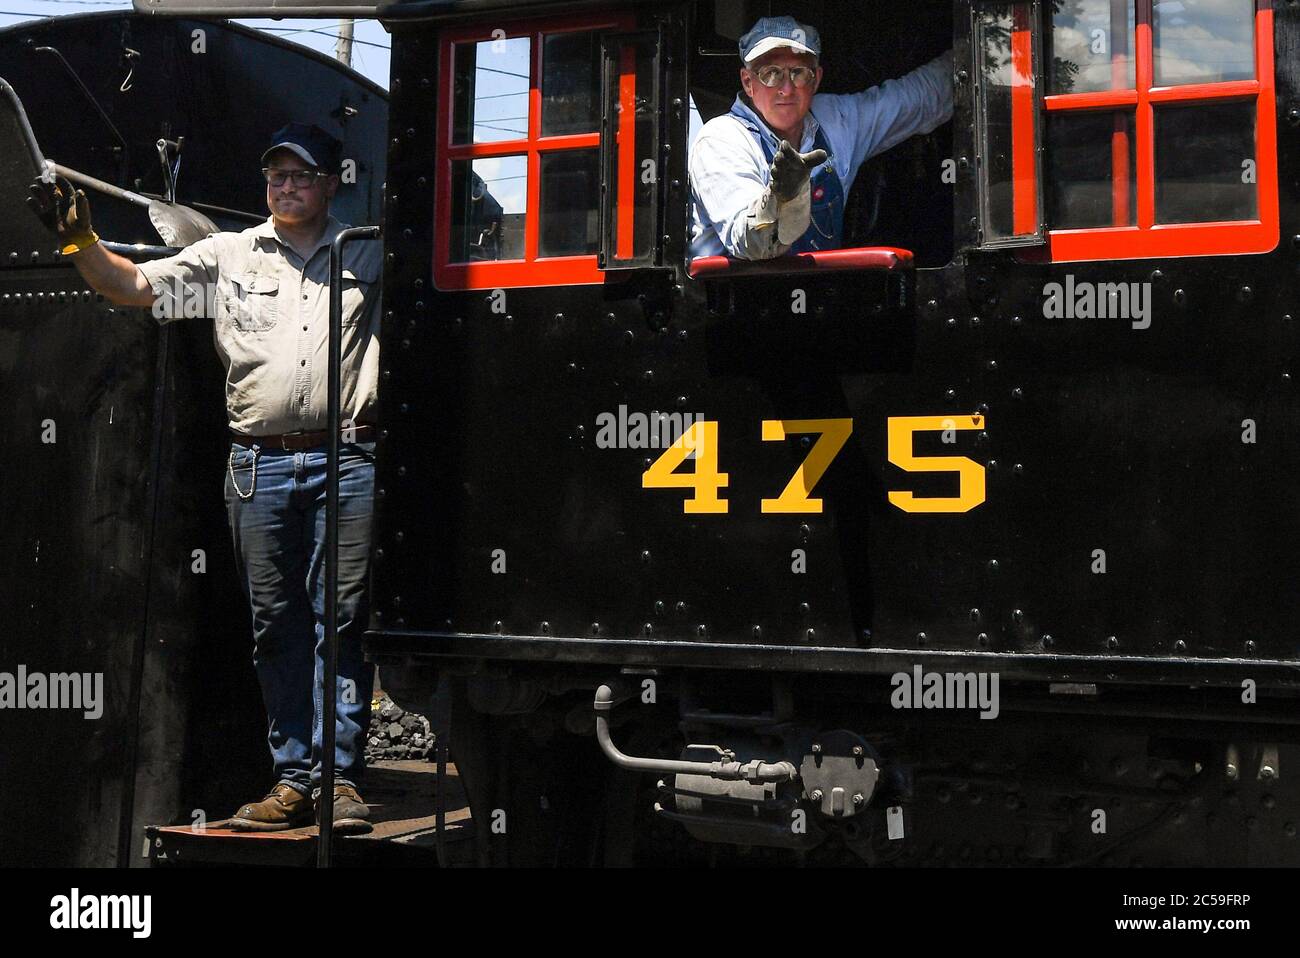 June 29, 2020: The Strasburg Railroad, Norfolk & Western, 475 steam locomotive fireman (left) and engineer (right), wave to passengers as the train changes ends during an excursion on Monday, June, 29, 2020, in Ronks, Pennsylvania. The Strasburg Railroad re-opened for passenger service on Friday, June, 26th, after being closed due to the COVID-19 pandemic. Additional health related safety measures have been put in place for the re-opening. Rich Barnes/CSM Stock Photo